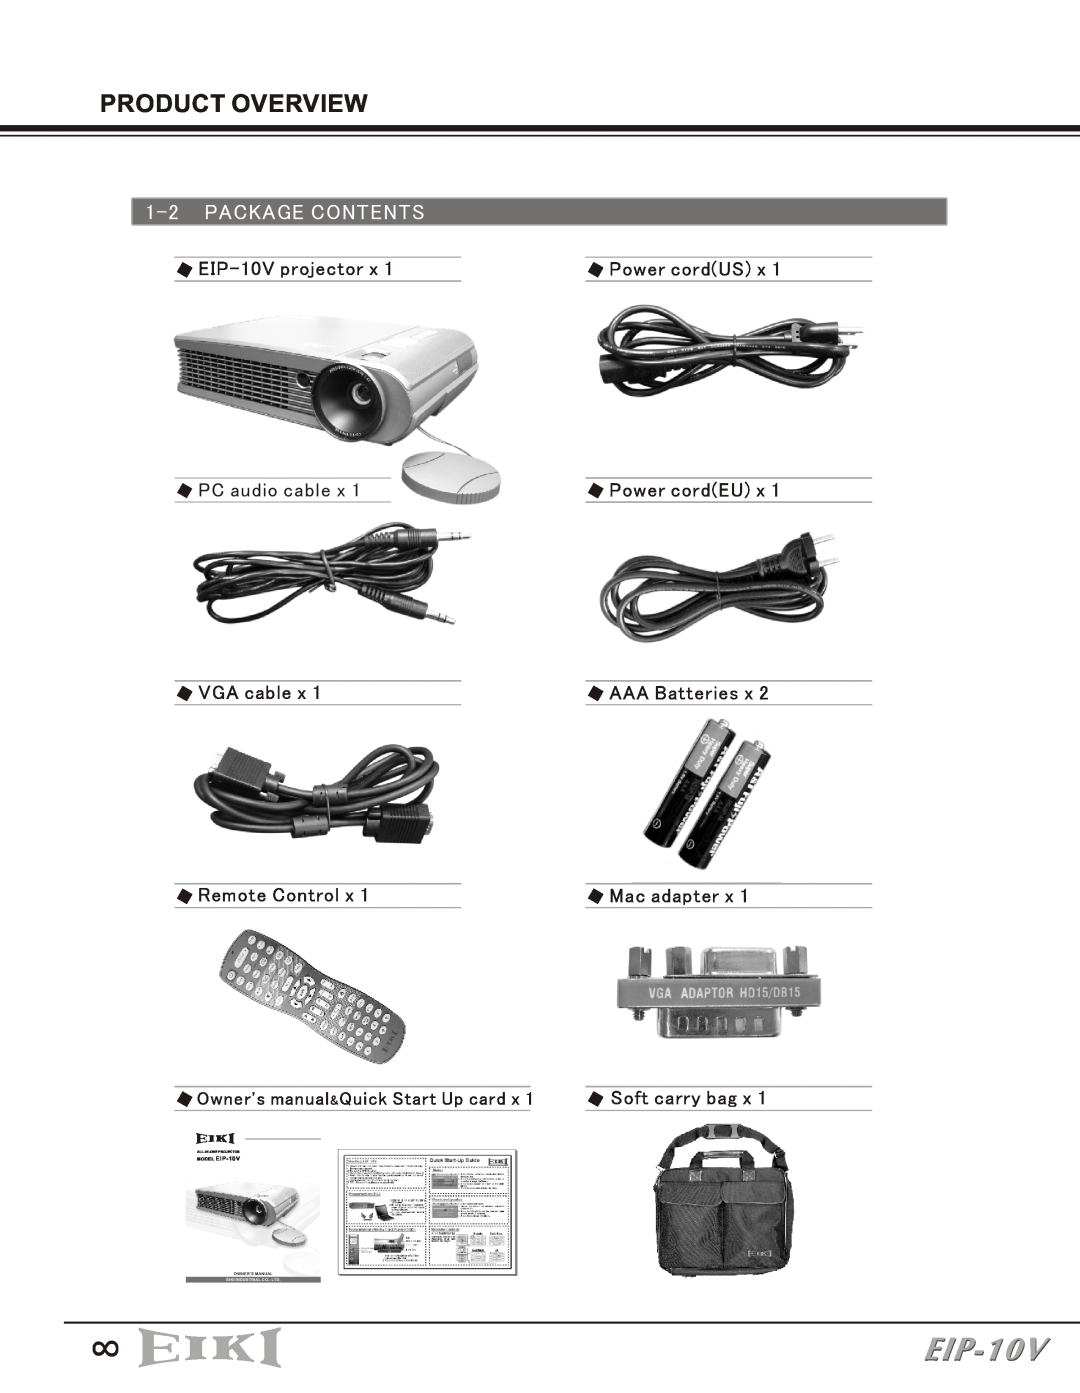 Eiki owner manual Product Overview, Package Contents, Soft carry bag, MODEL EIP-10V, All-In-One Projector 